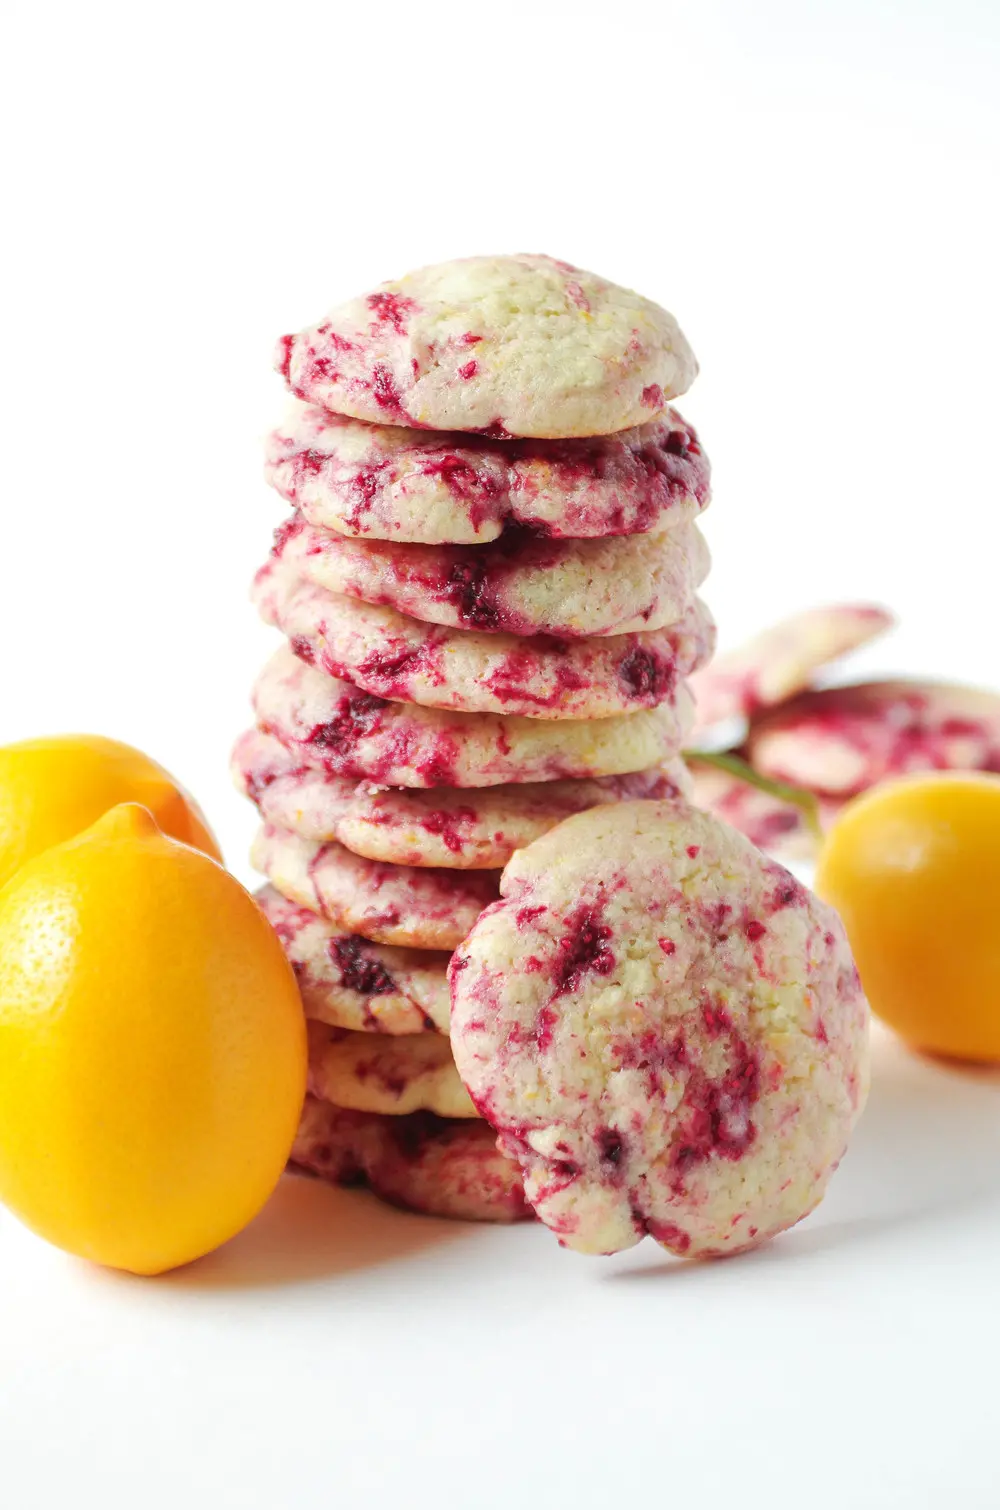 Stack of lemon raspberry cookies surrounded by whole lemons on a white background.